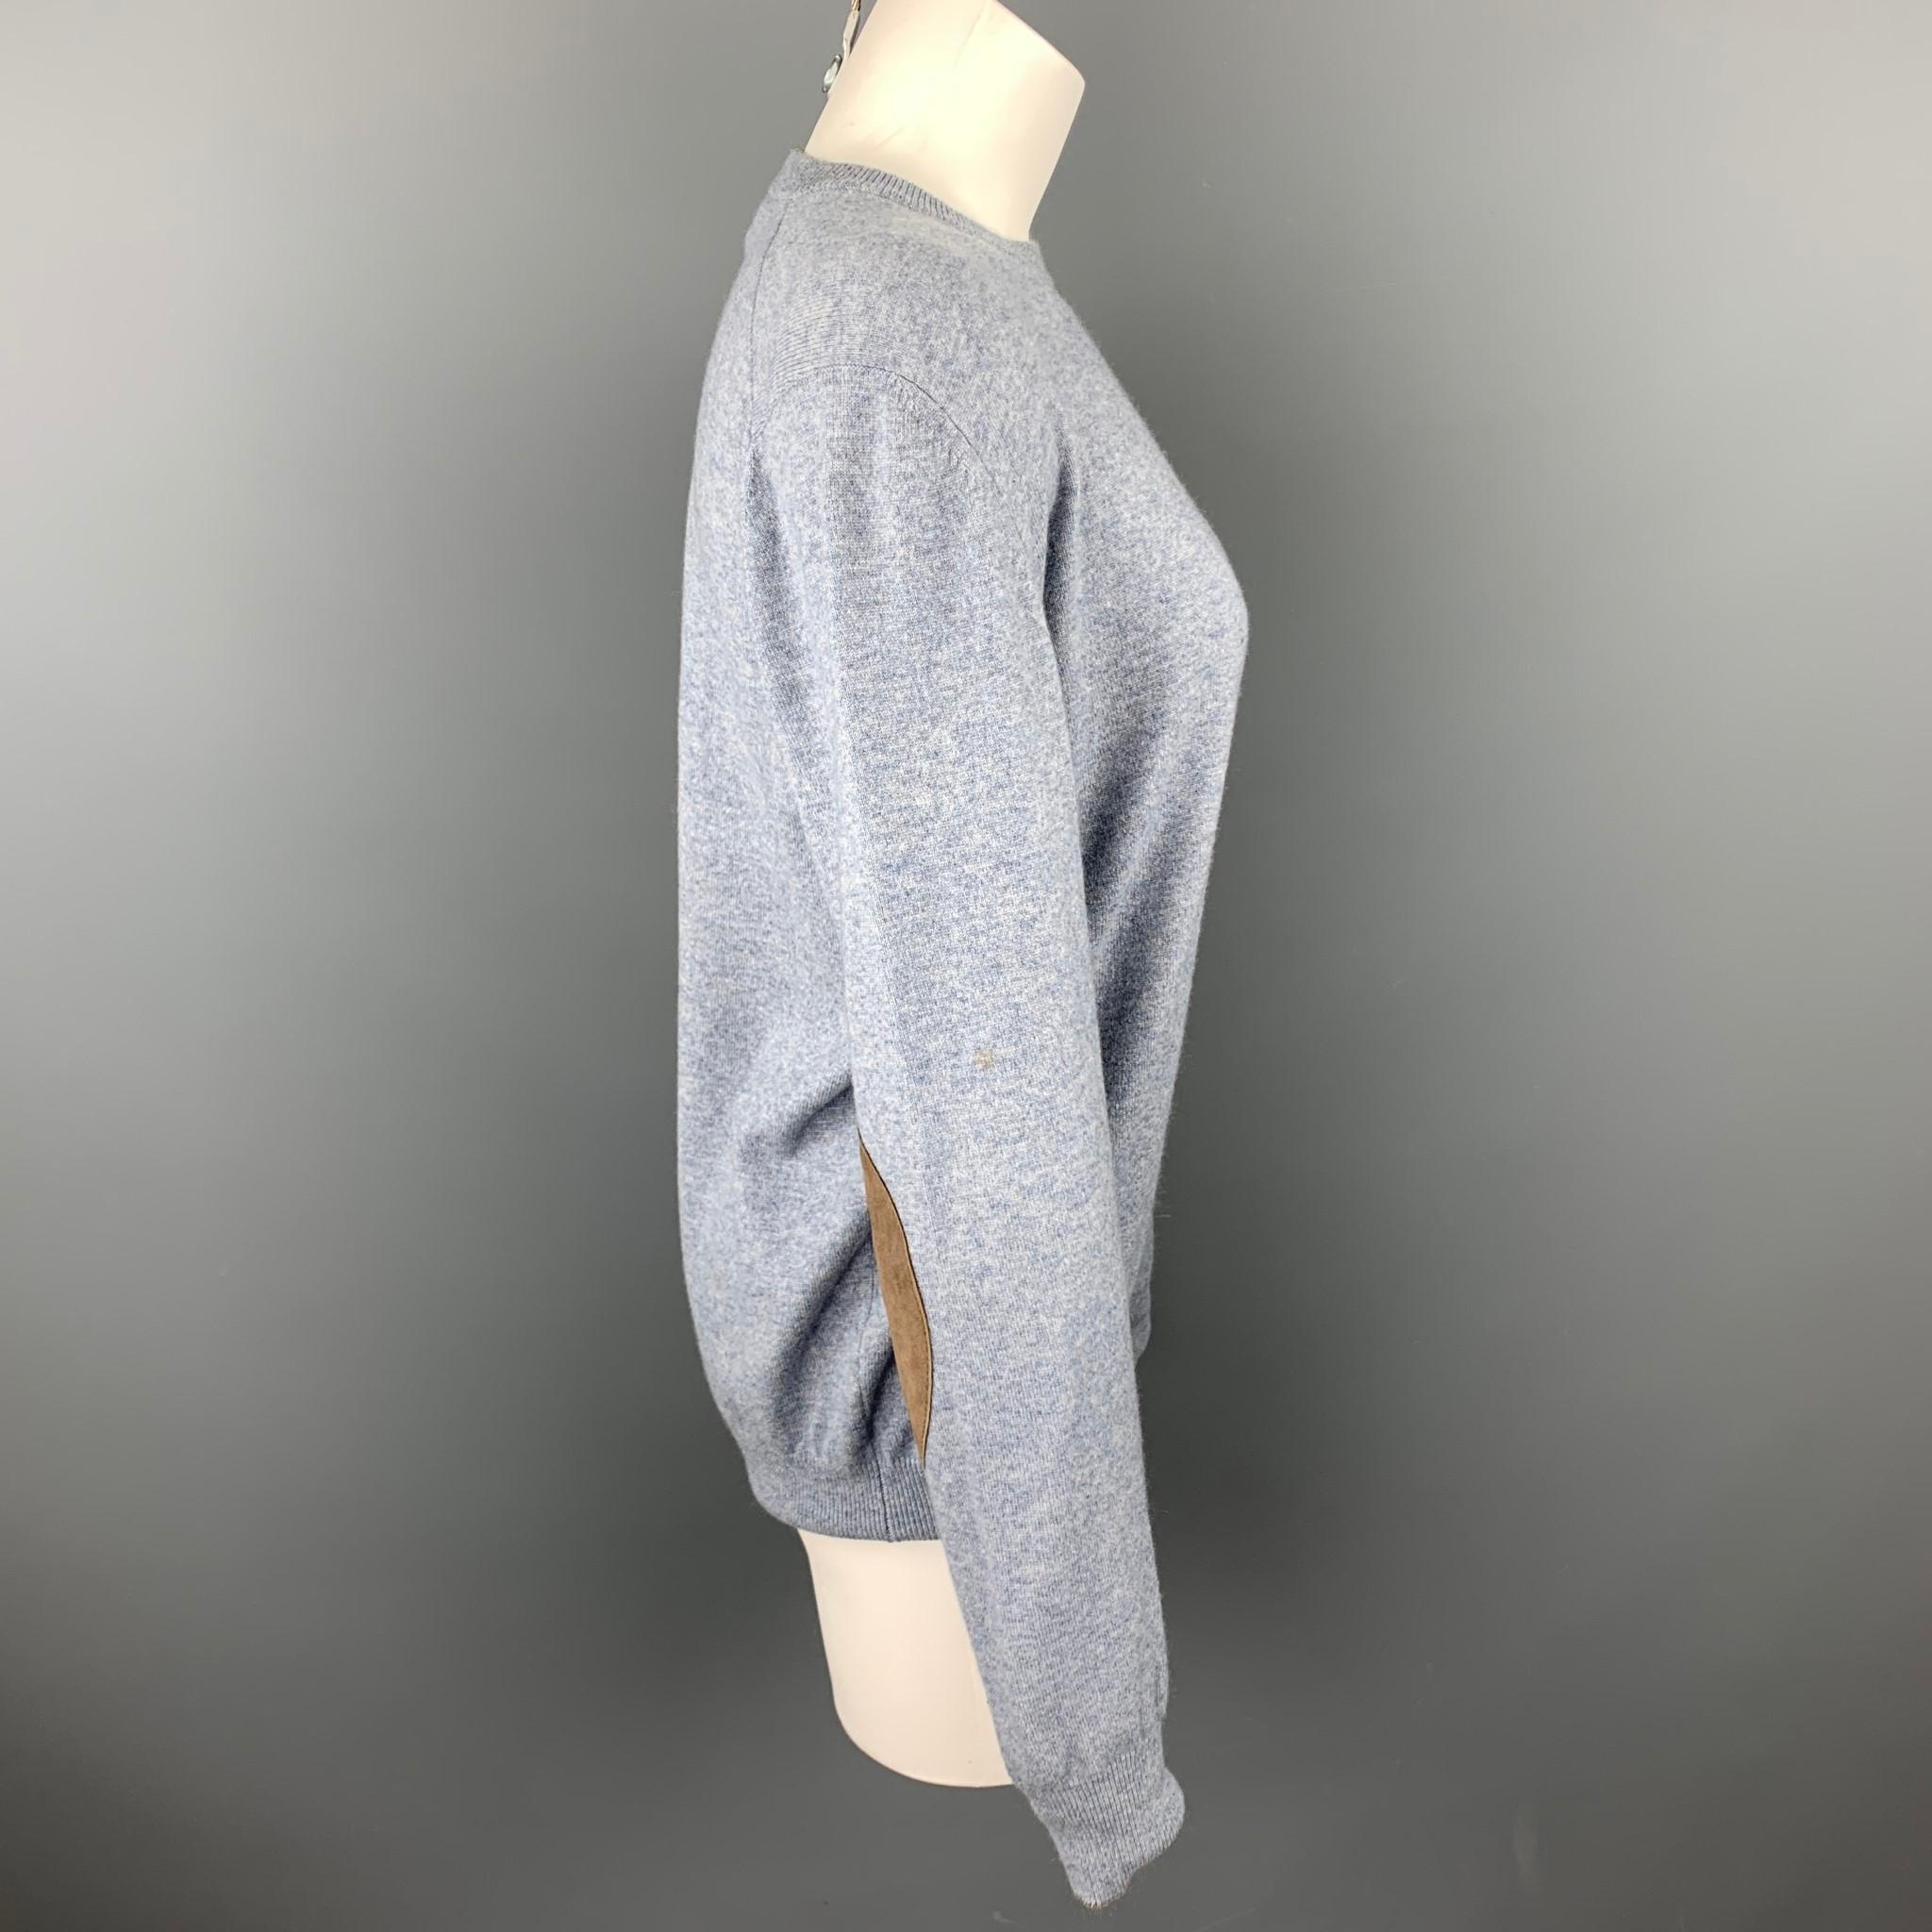 BRUNELLO CUCINELLI sweater comes in a blue cashmere with suede elbow patches featuring a ribbed crew-neck. Made in Italy.

Very Good Pre-Owned Condition.
Marked: 50
Original Retail Price: $895.00

Measurements:

Shoulder: 17 in. 
Bust: 42